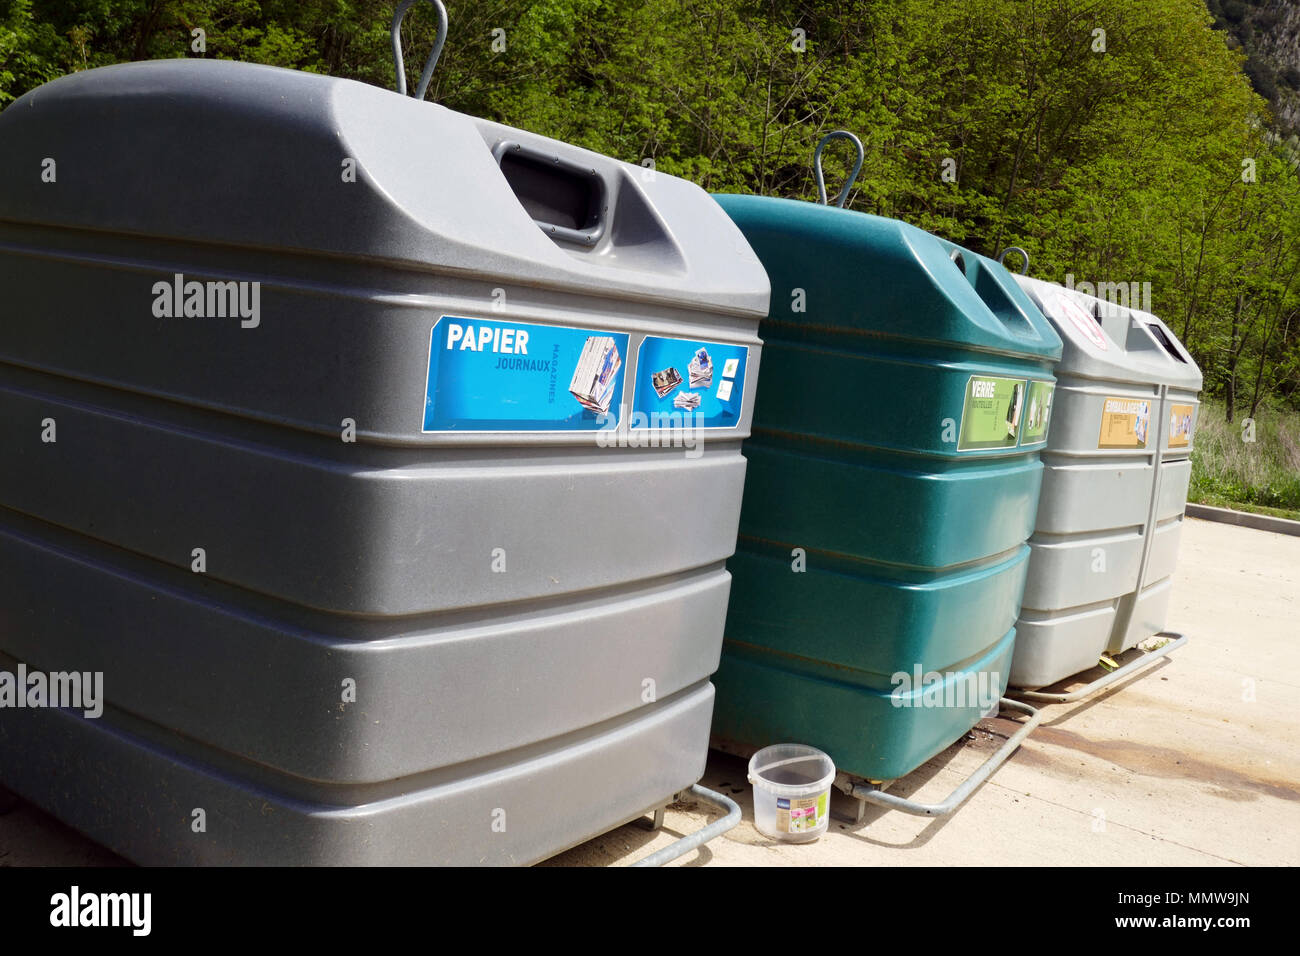 Large coloured recycling bins for glass paper and packaging Recycling bins in a row, lined up, Ariege, France, Stock Photo